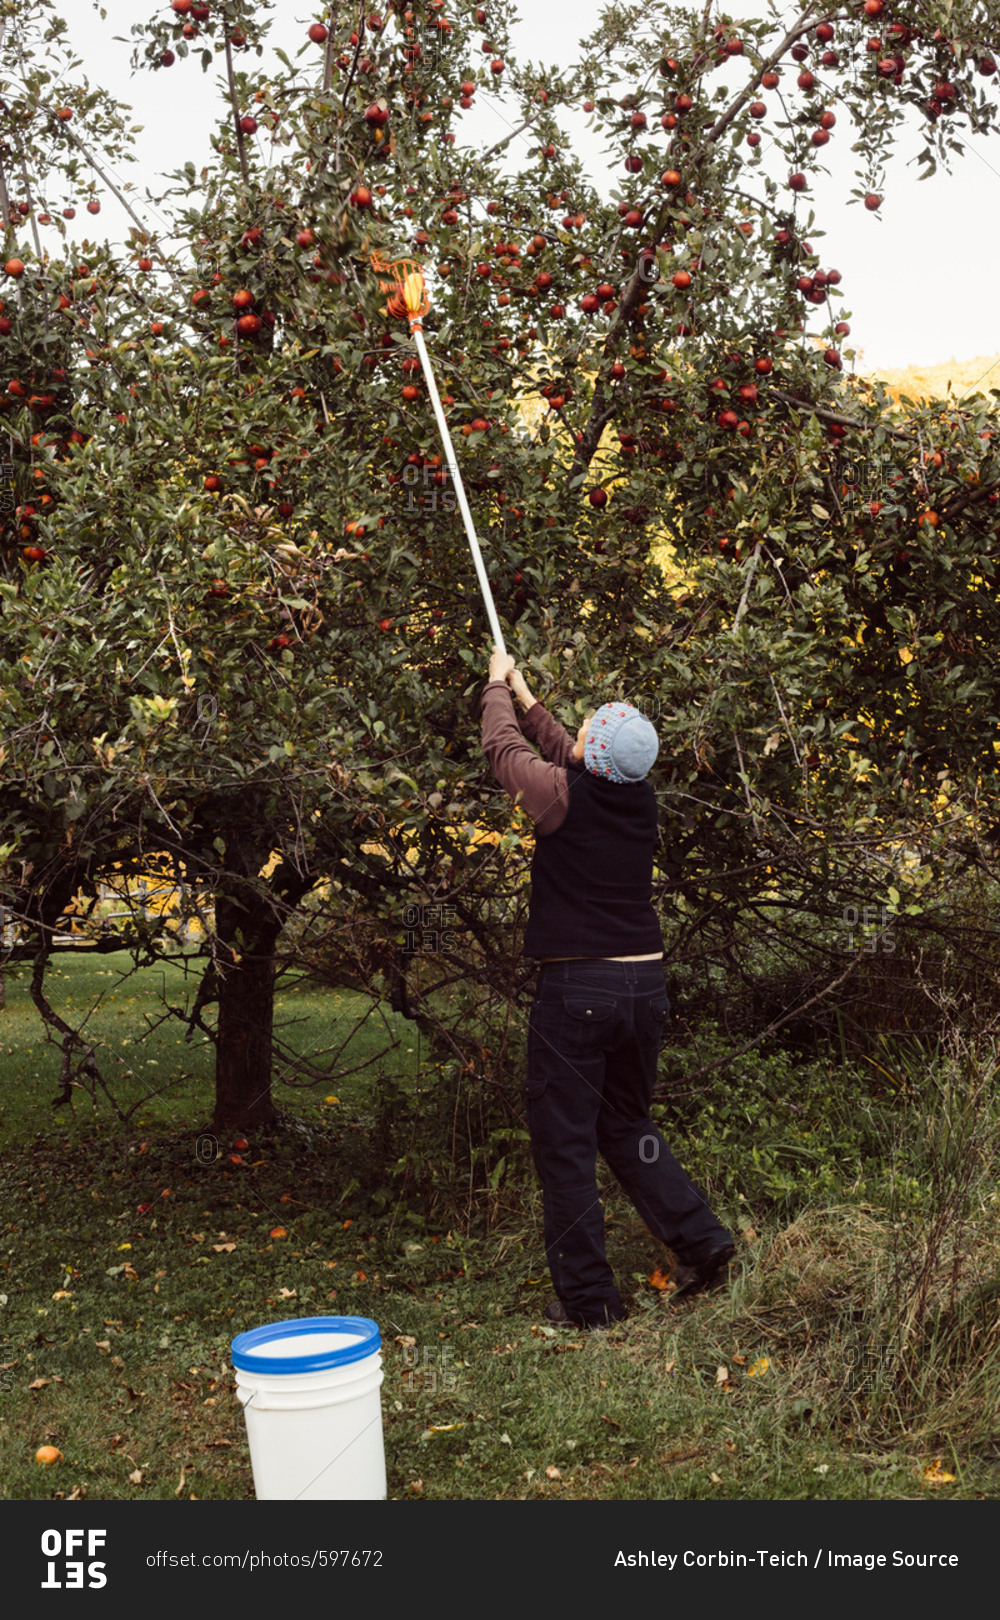 Woman picking apples from tree using fruit picker, rear view